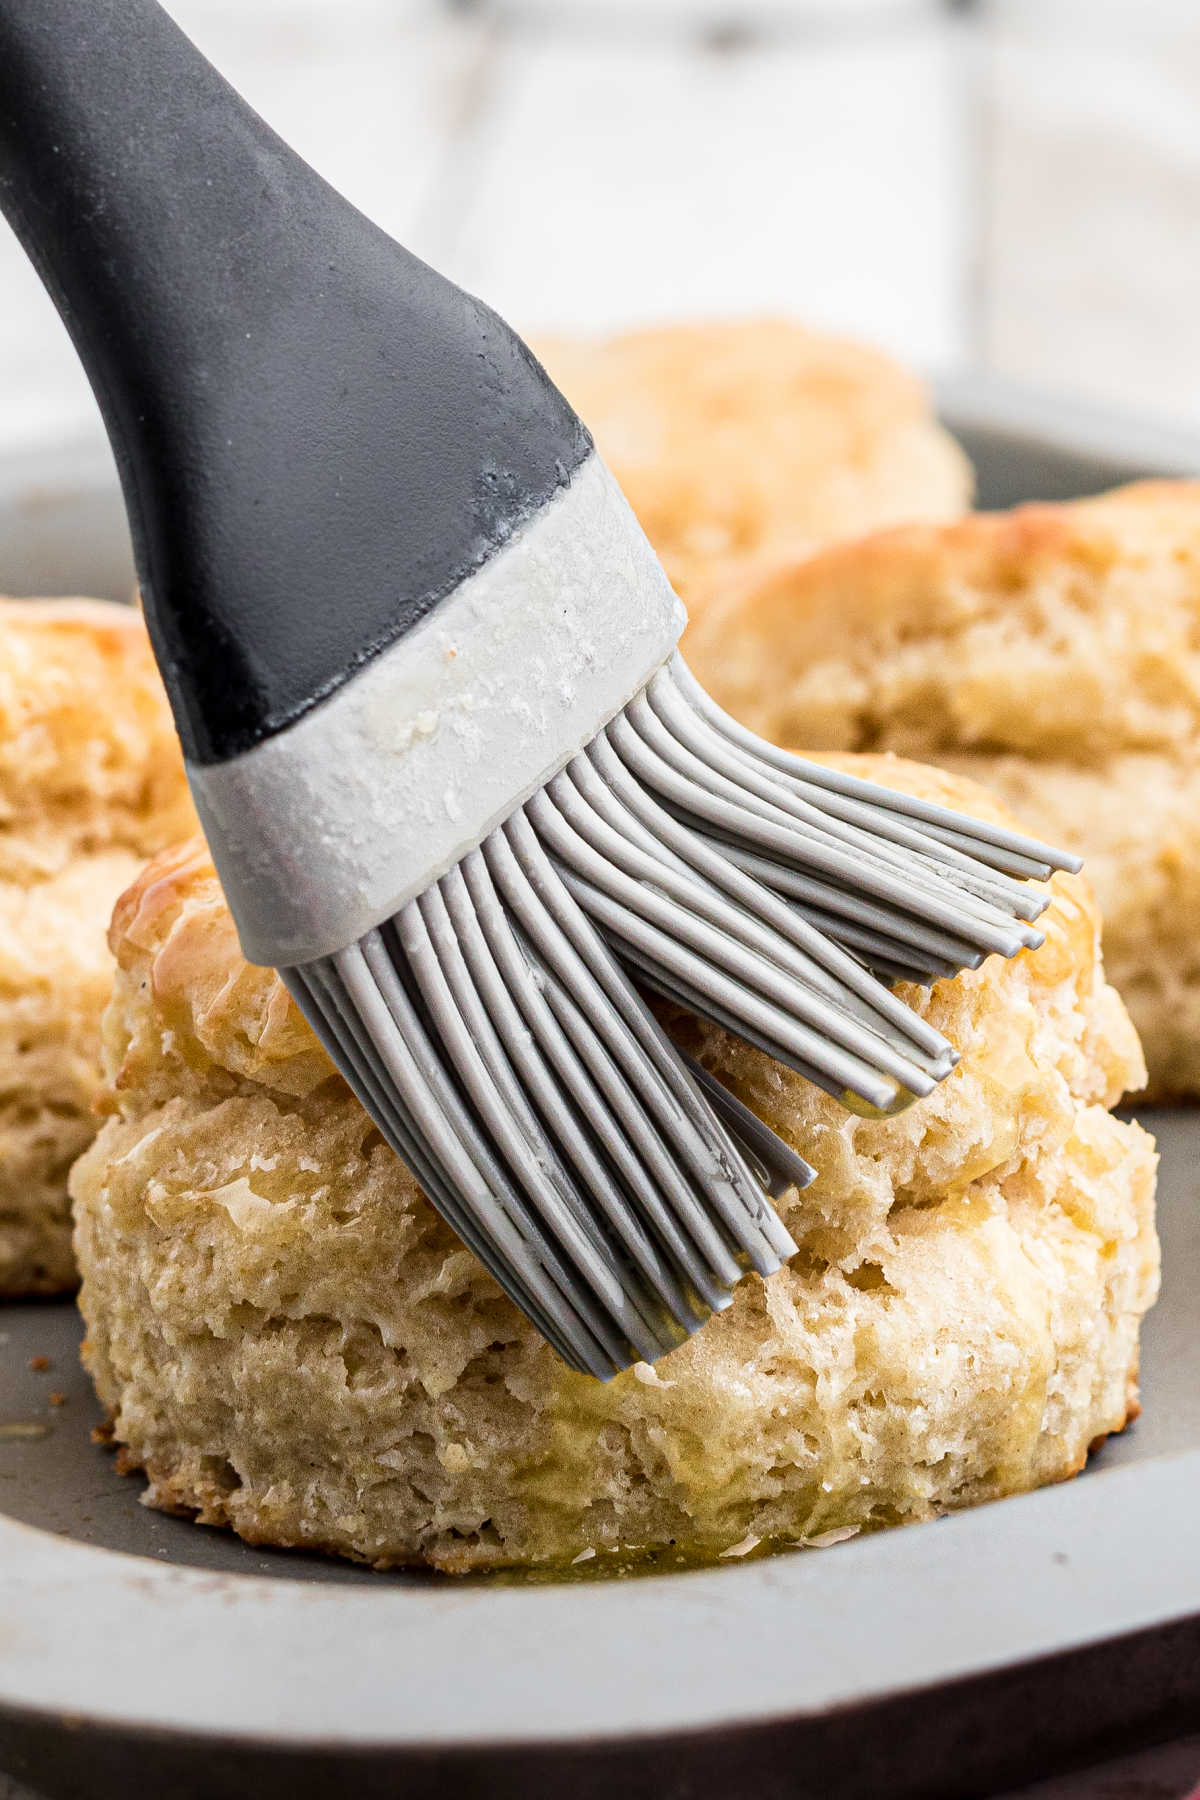 A pastry brush brushing some old fashioned southern biscuits.